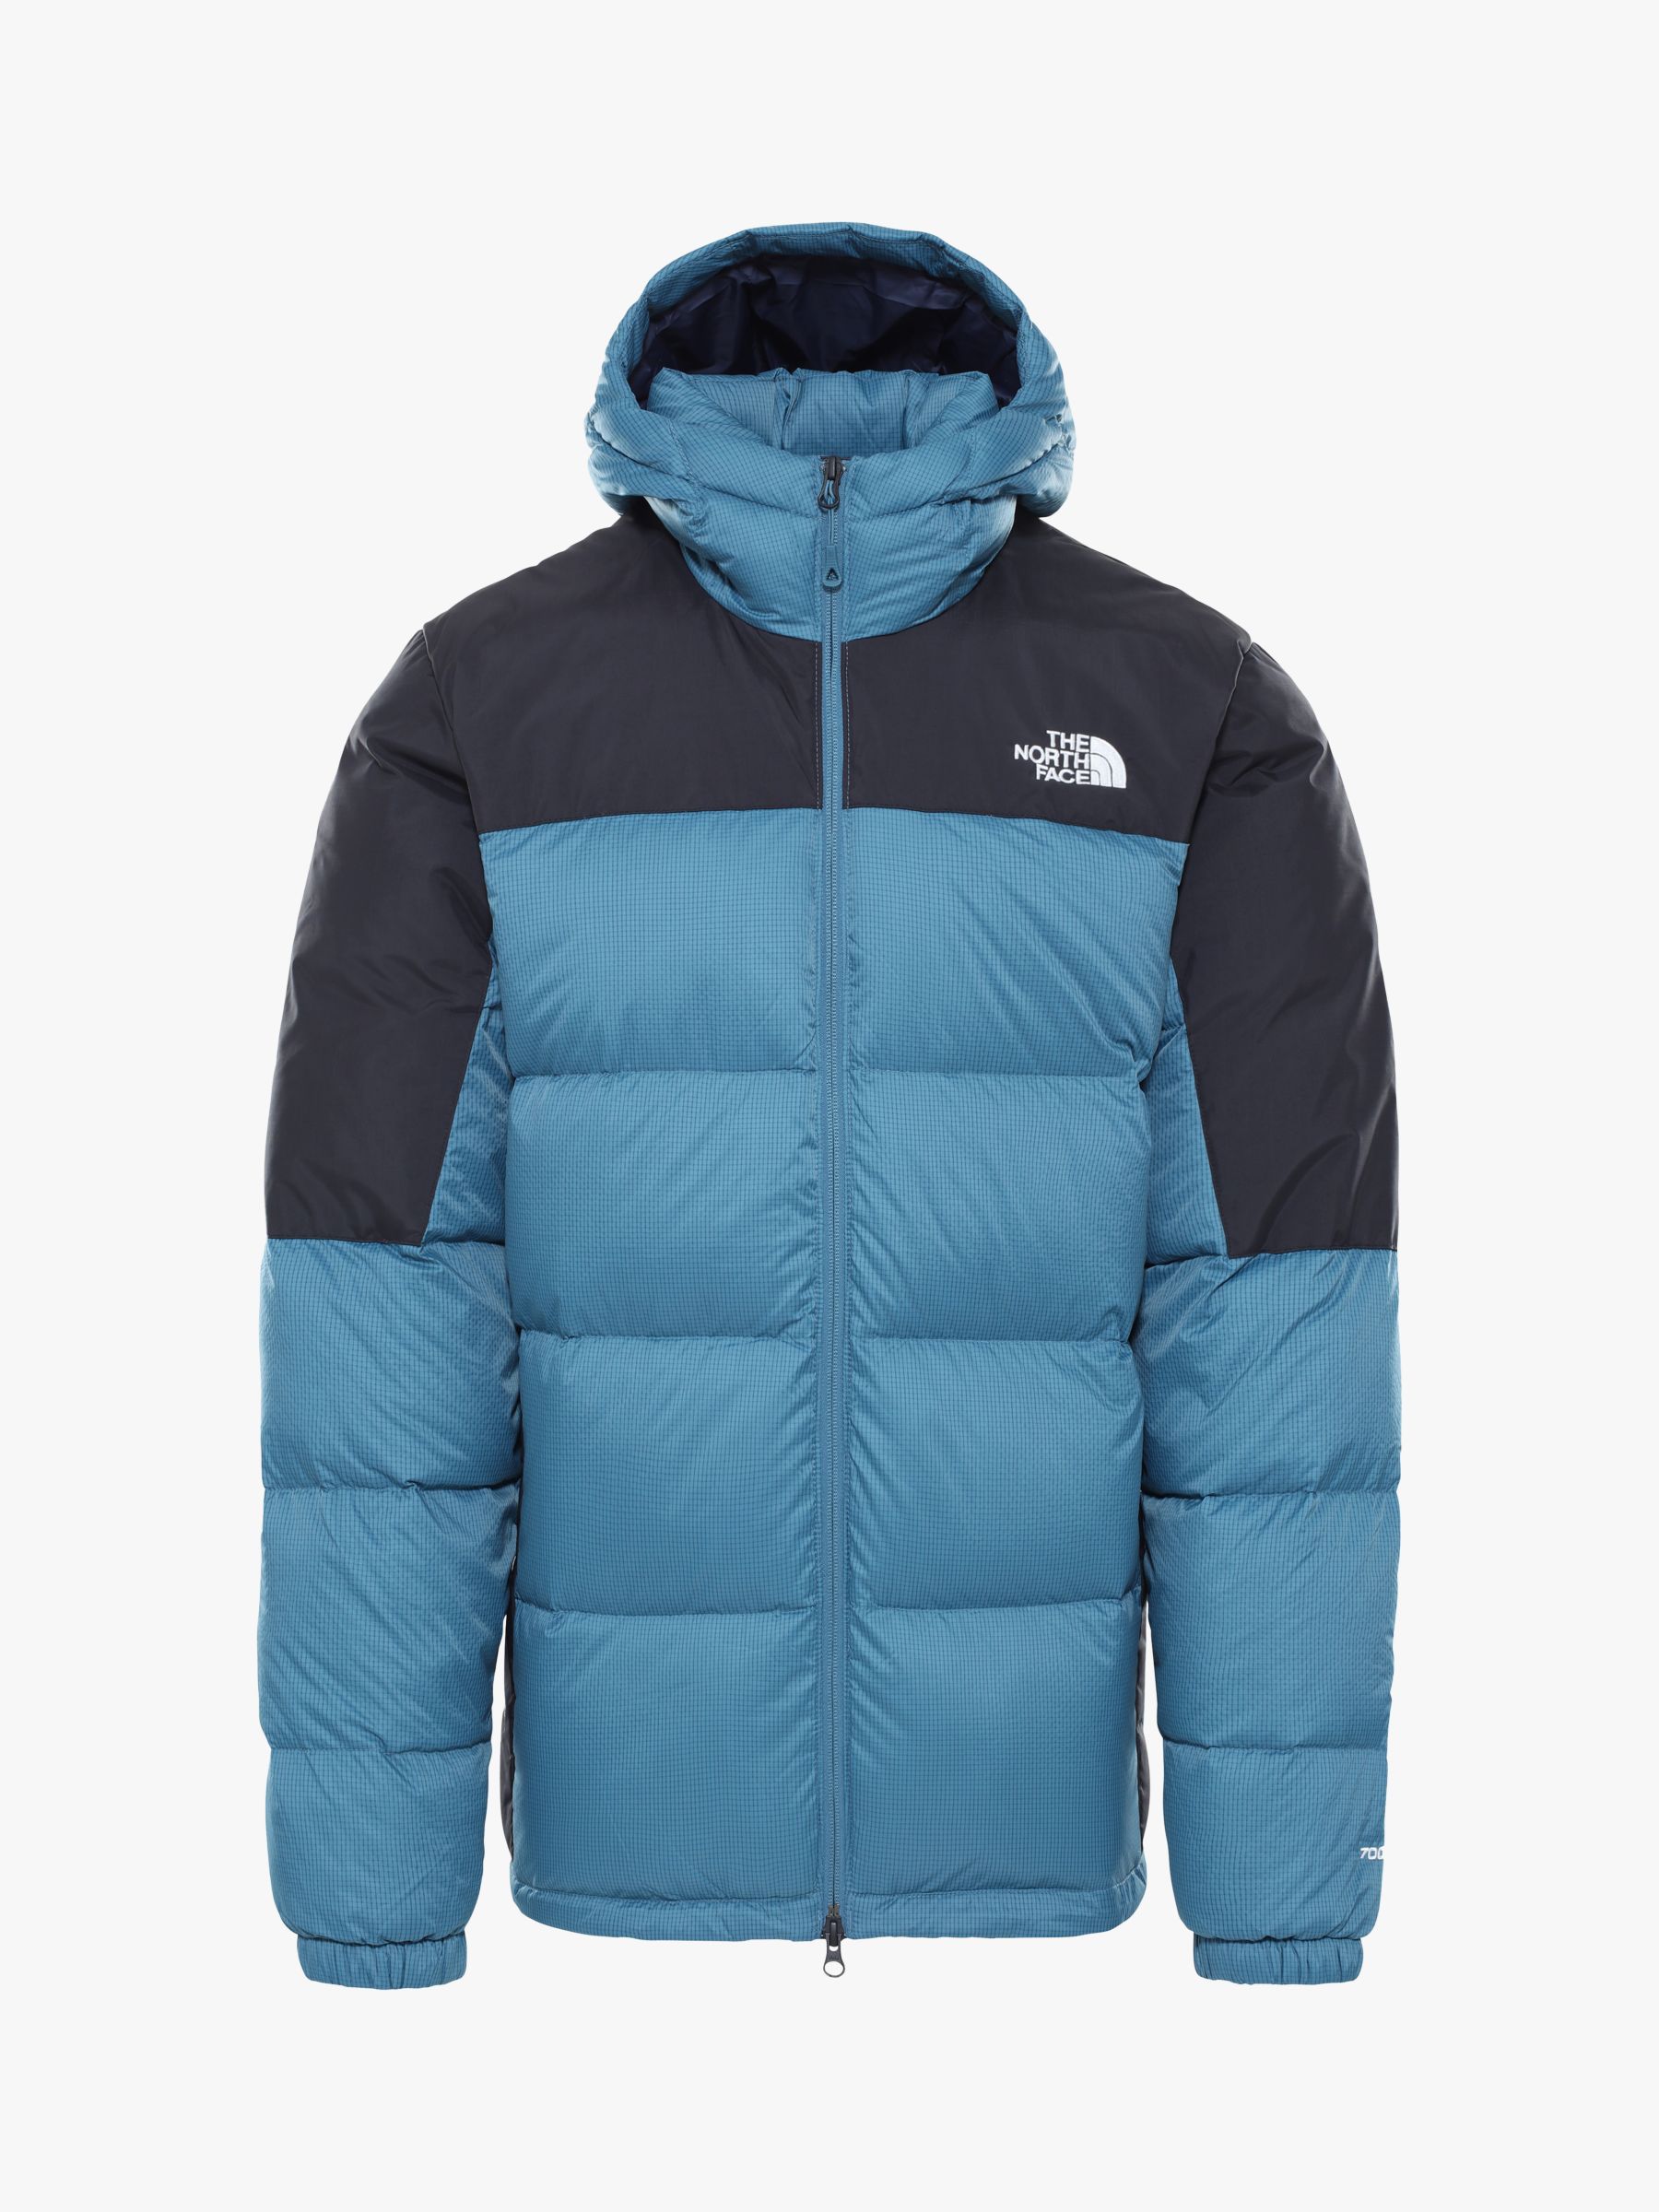 the north face tnf jacket